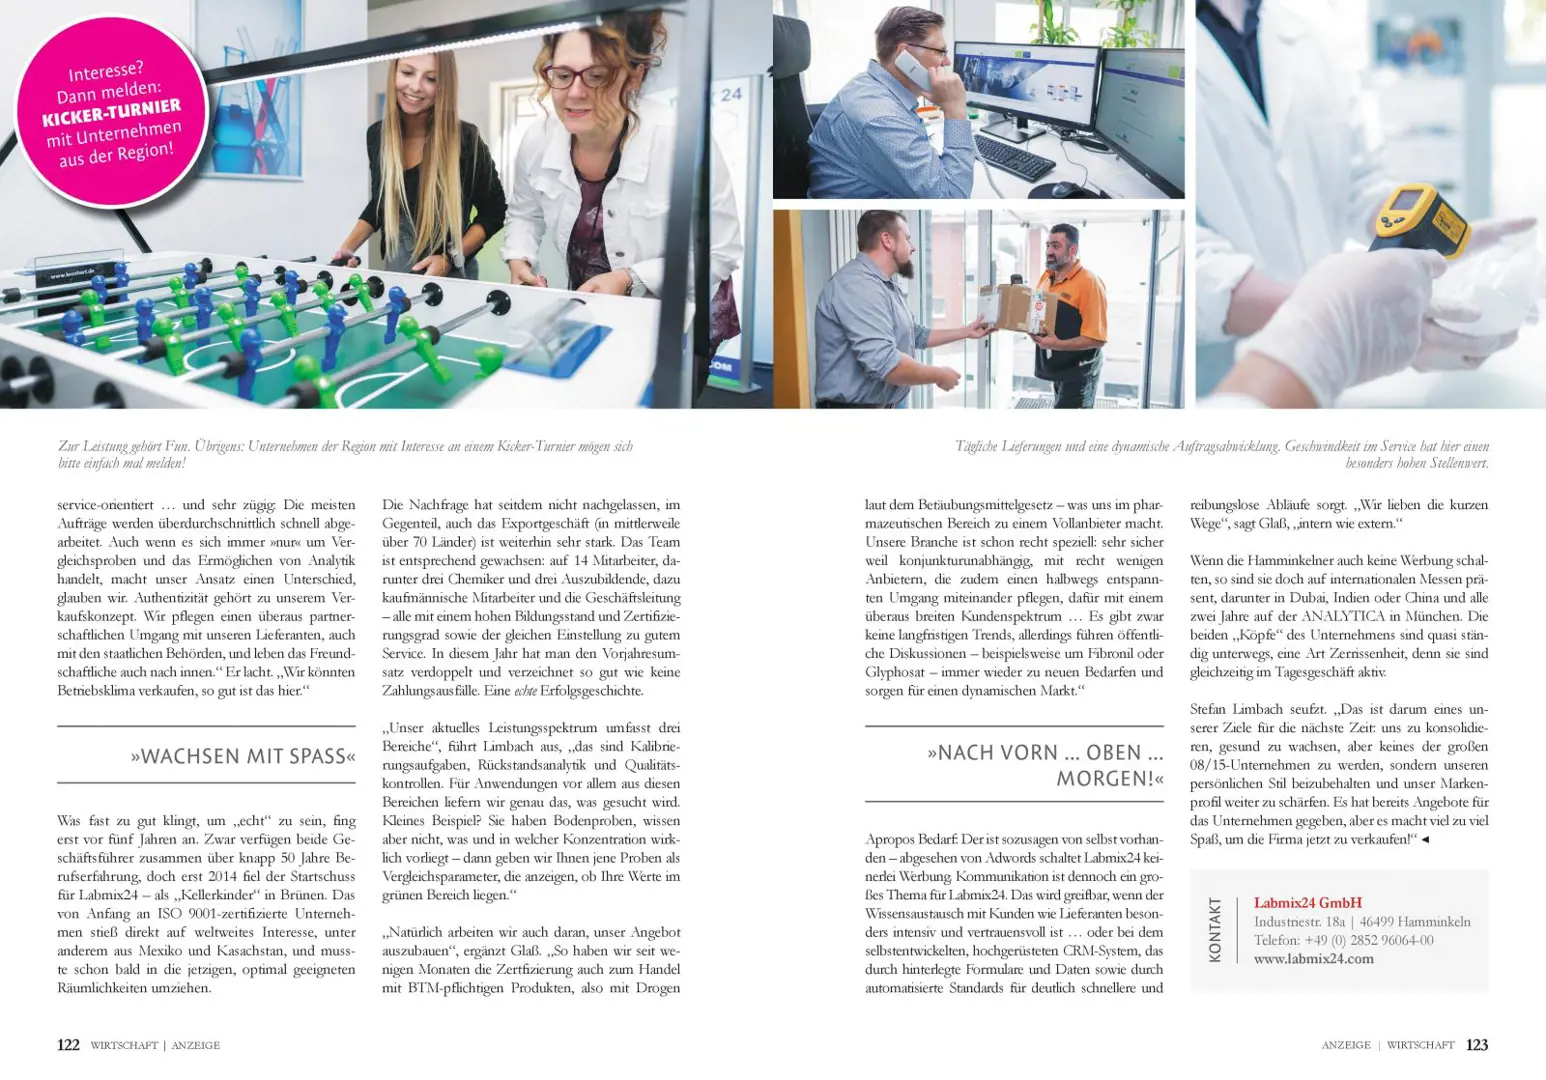 Second 2 pages of the article featuring Labmix24 in the magazine Vier.Sechs.Drei.